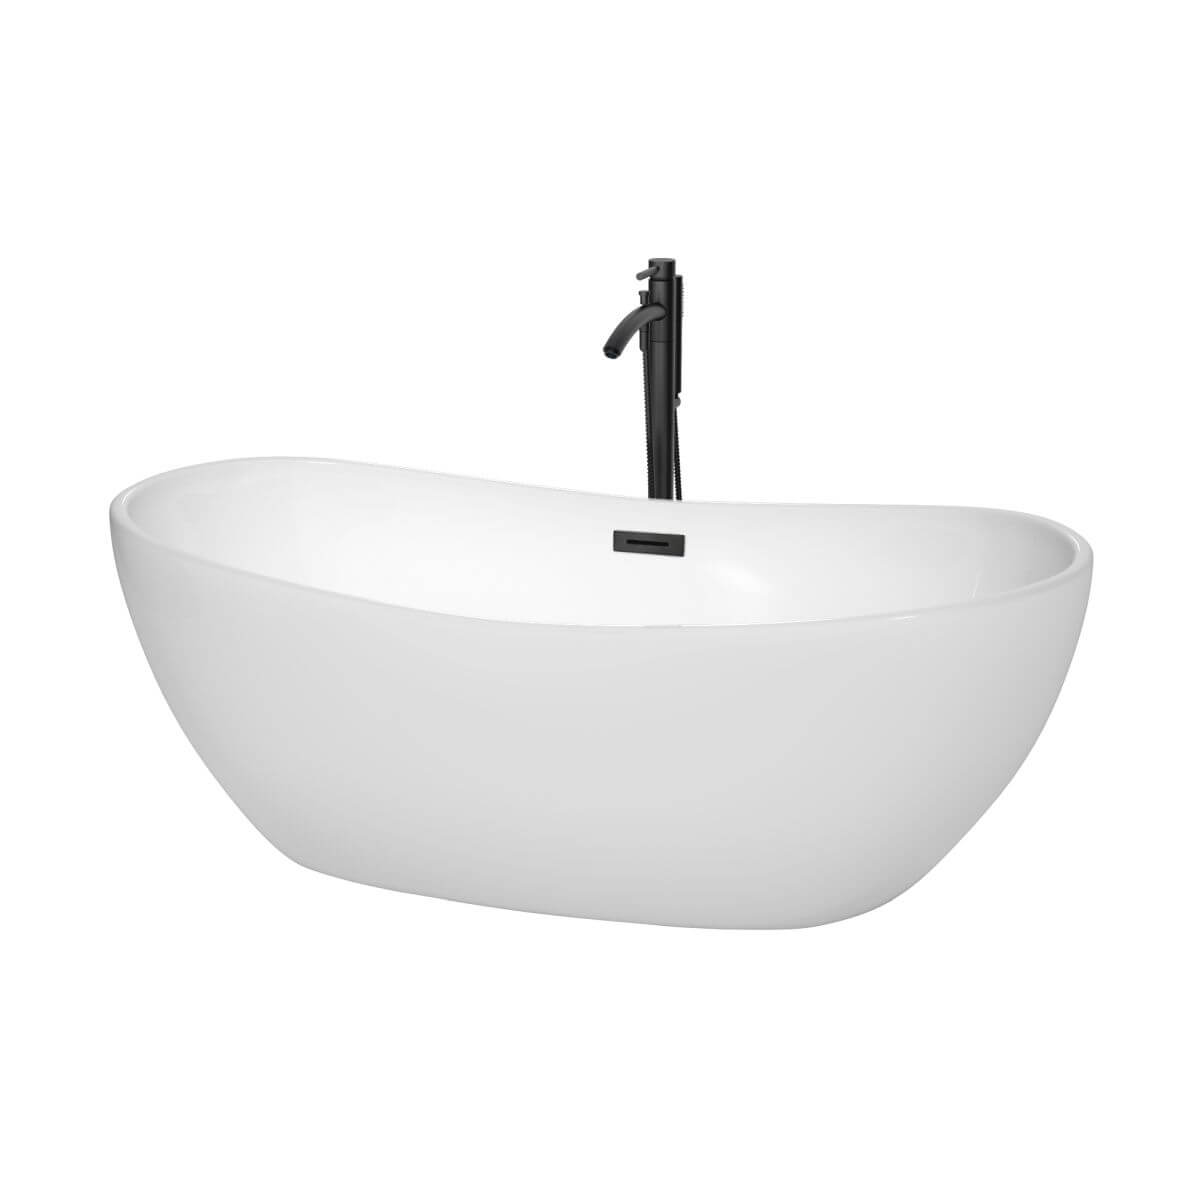 Wyndham Collection Rebecca 65 inch Freestanding Bathtub in White with Floor Mounted Faucet, Drain and Overflow Trim in Matte Black - WCOBT101465MBATPBK